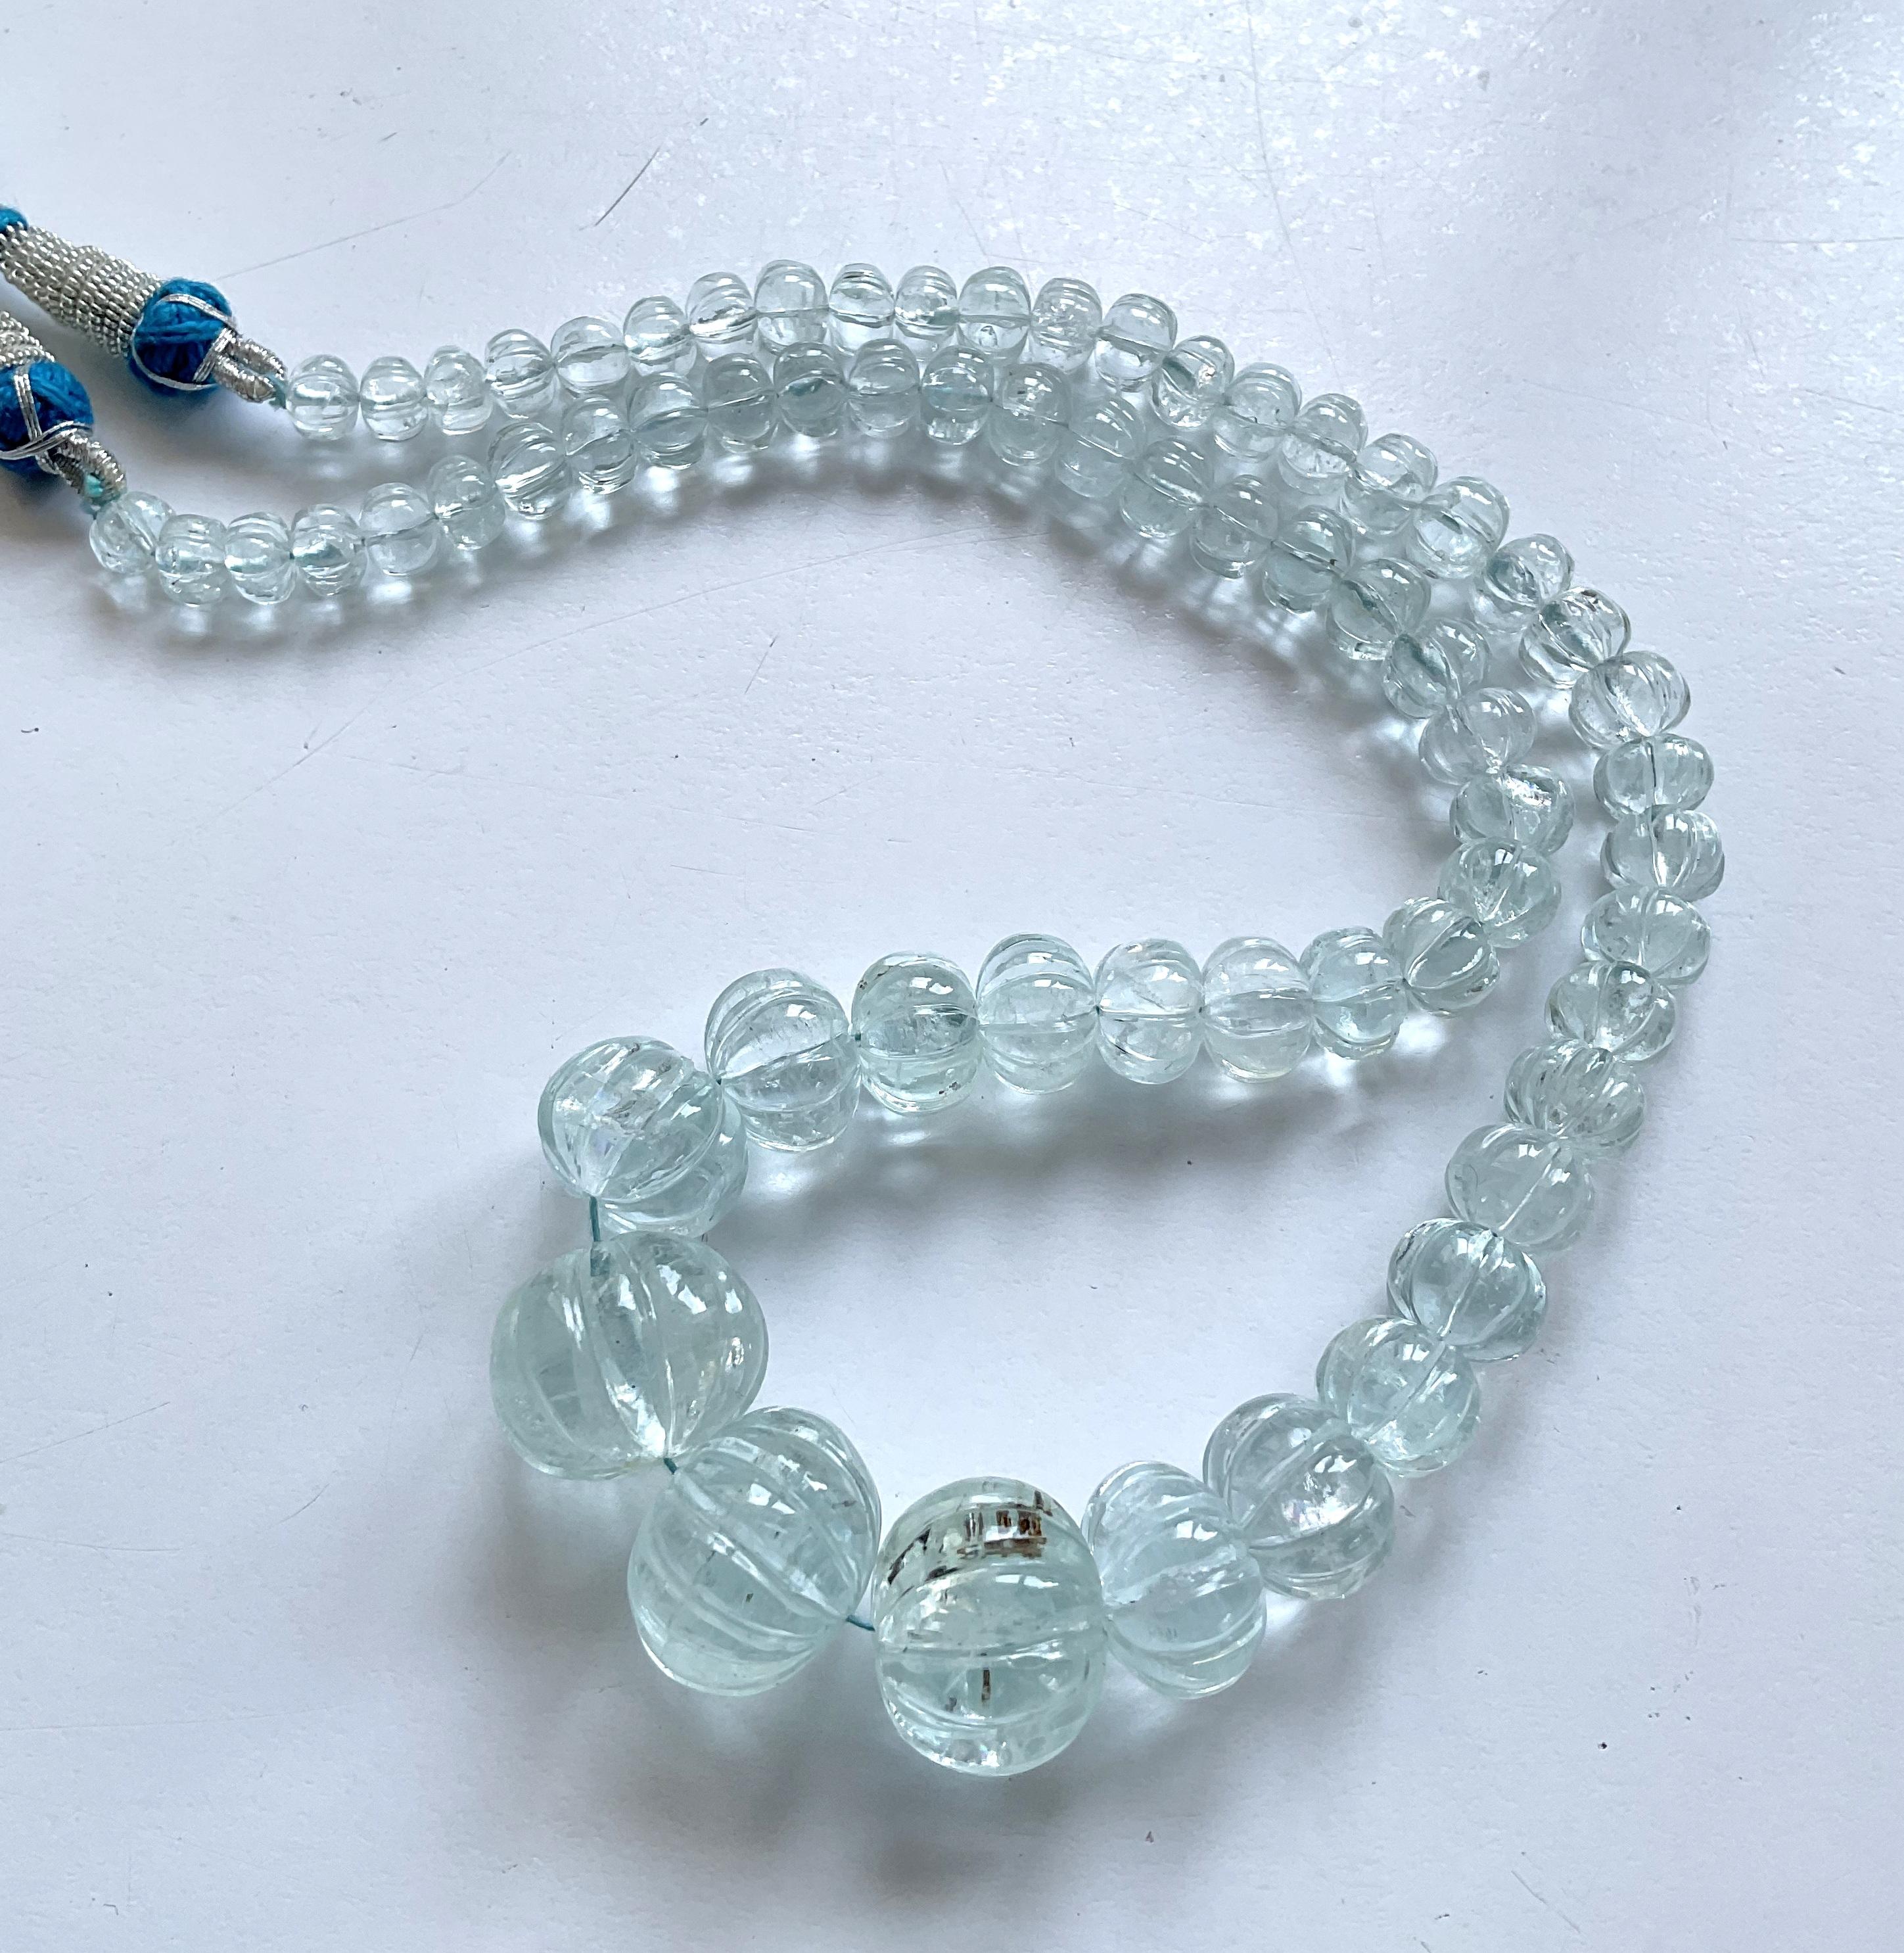 327.80 Carats Aquamarine Carved Melon Beads Necklace Natural Gemstone For Sale 1